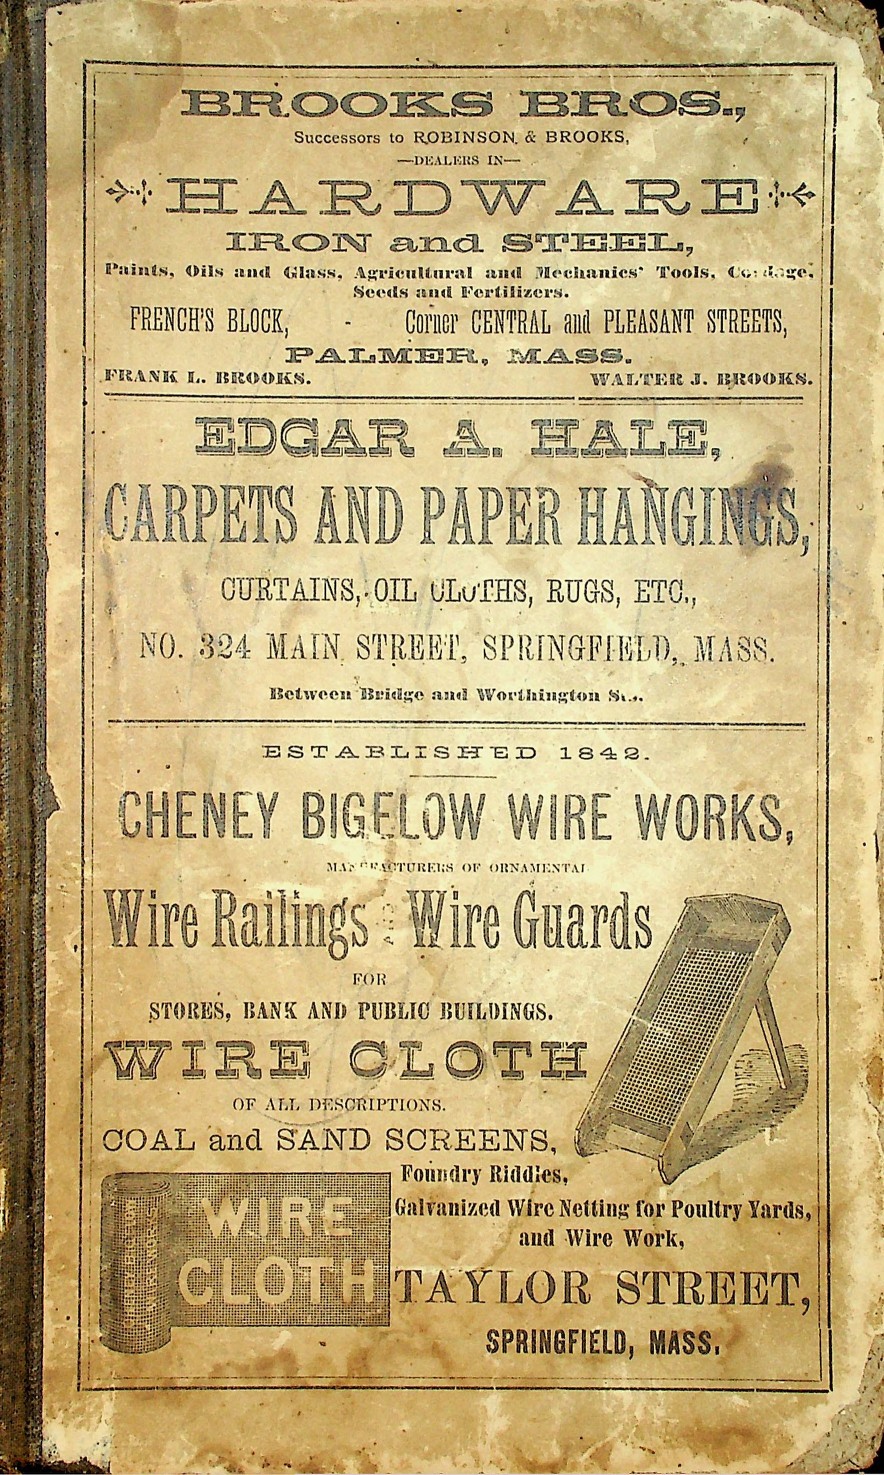 Palmer and Monson directory for 1884